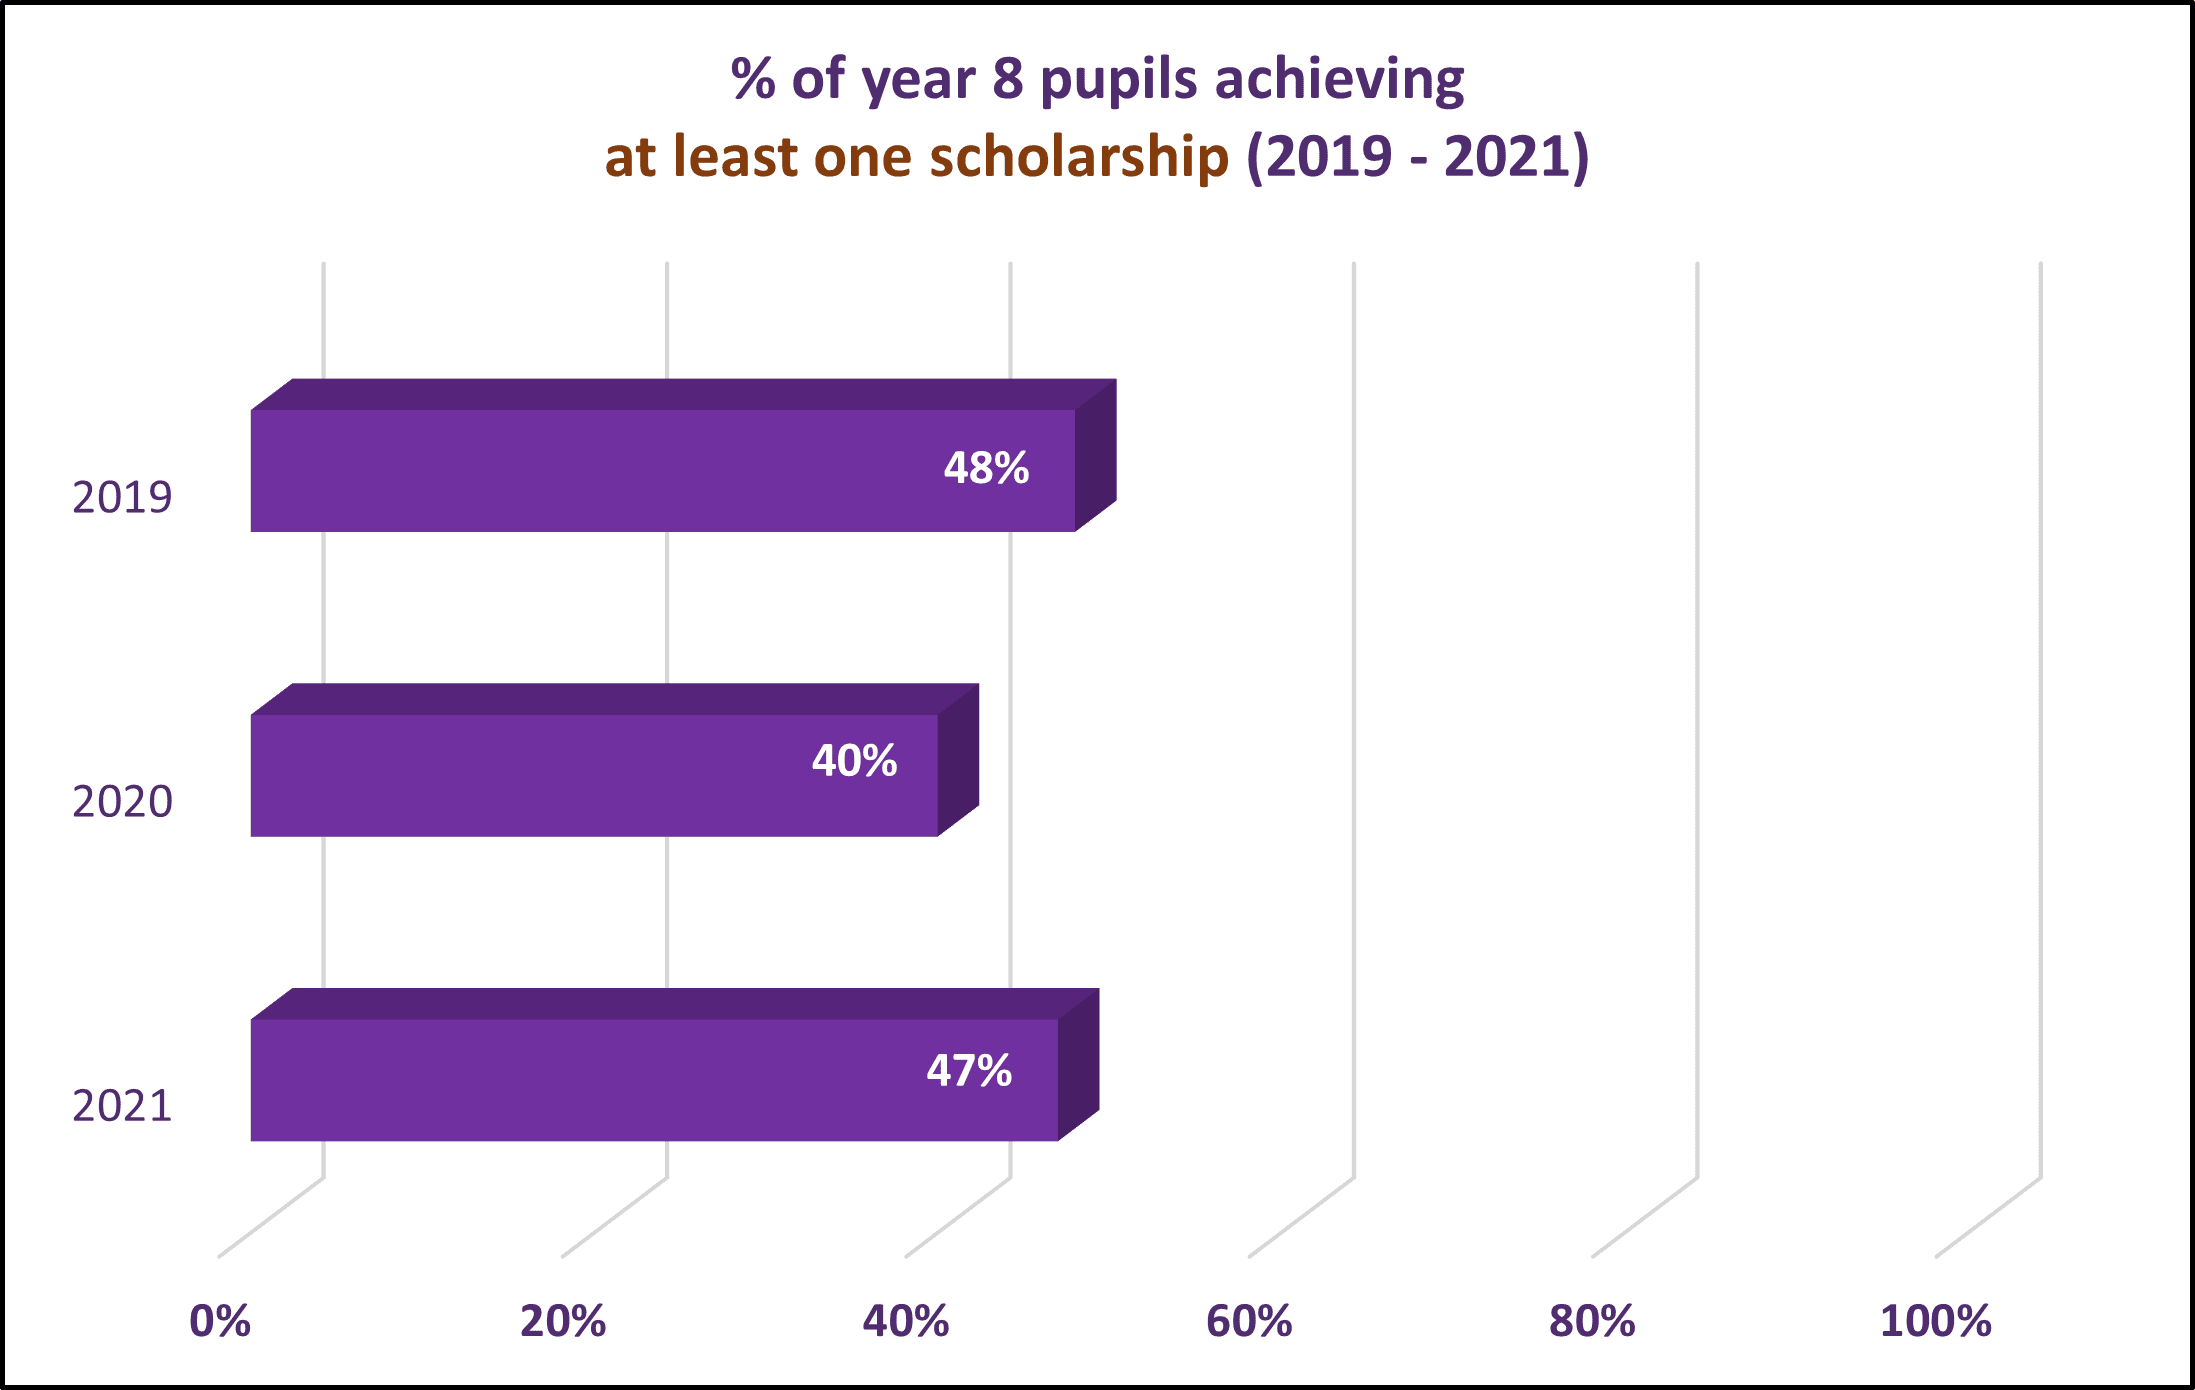 % of year 8 pupils achieving at least one scholarship (2019-2021)